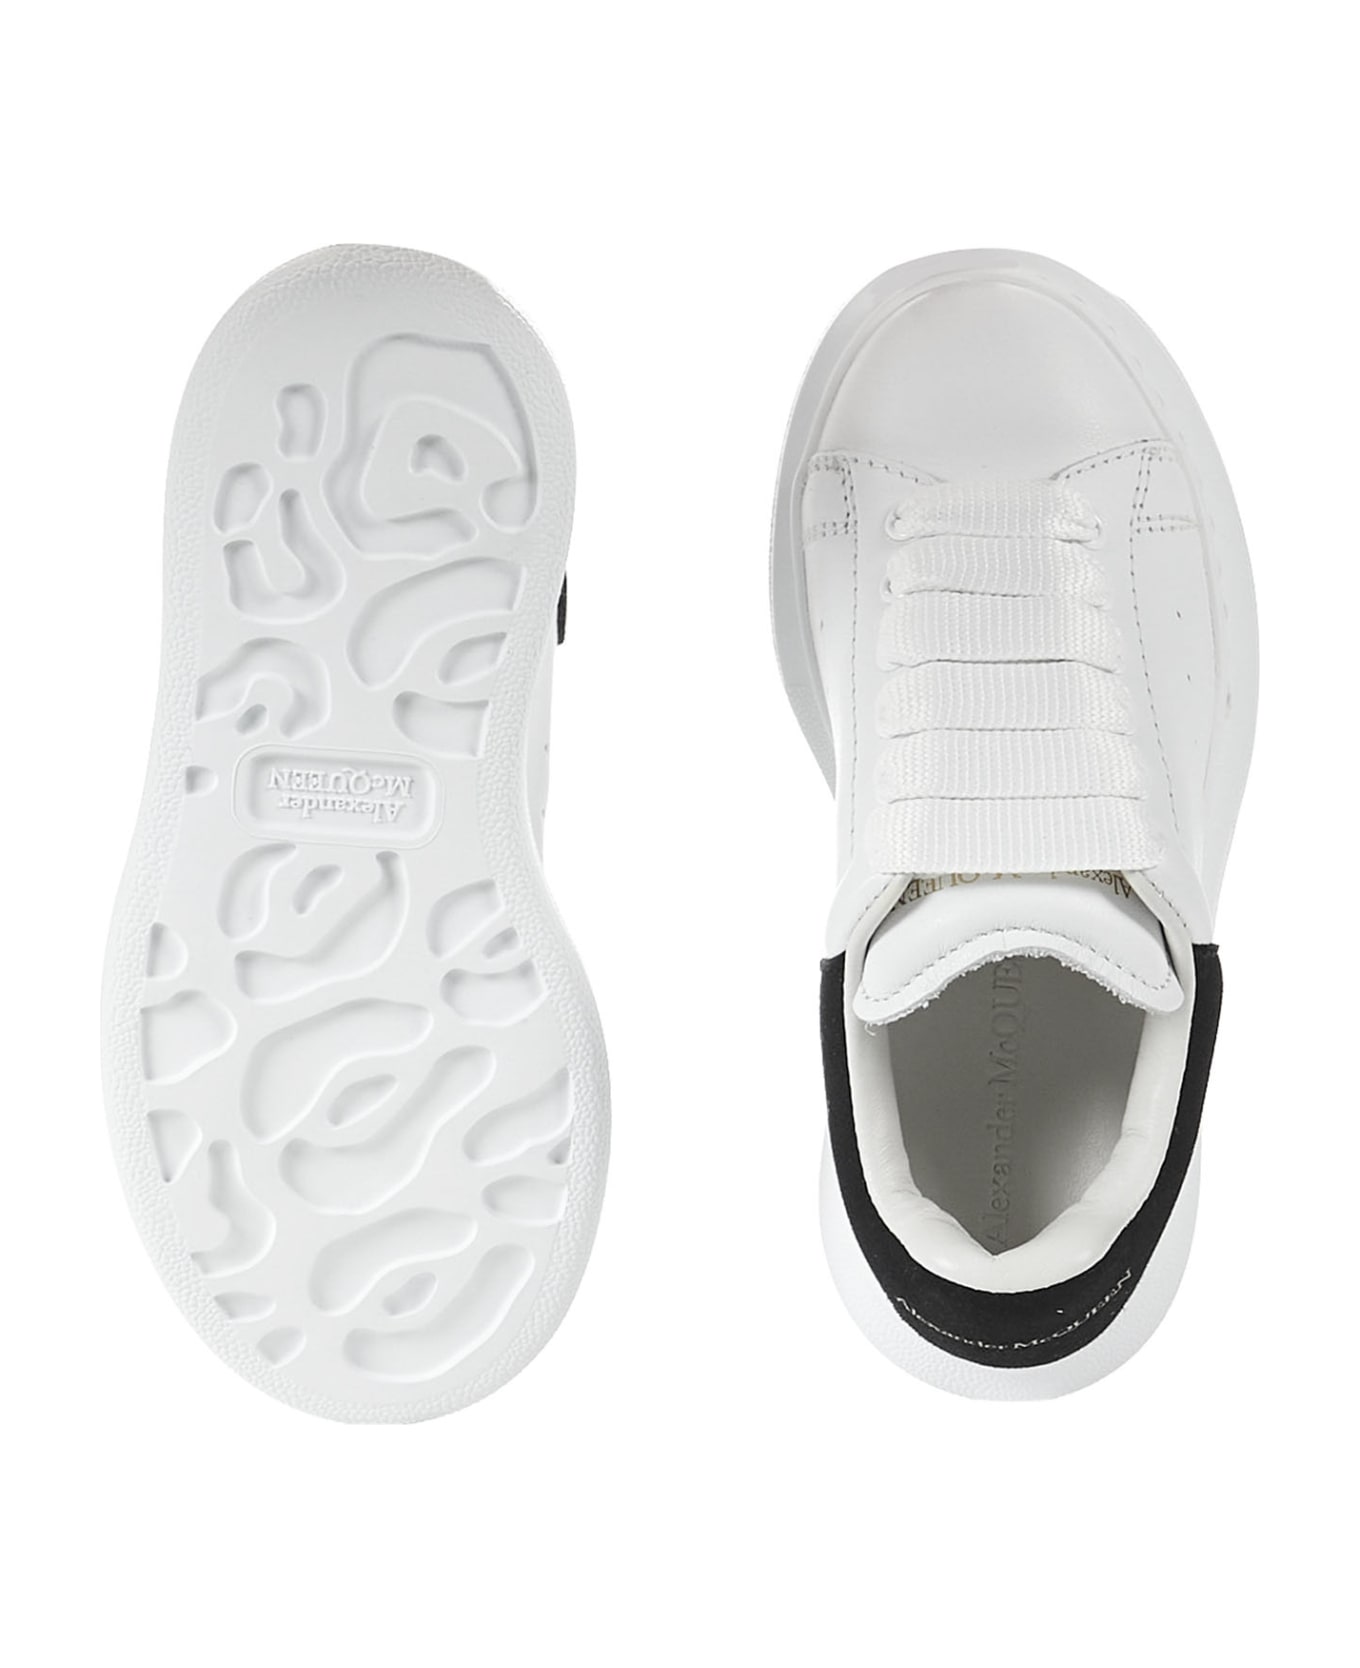 Alexander McQueen Oversize Sneakers - White and black